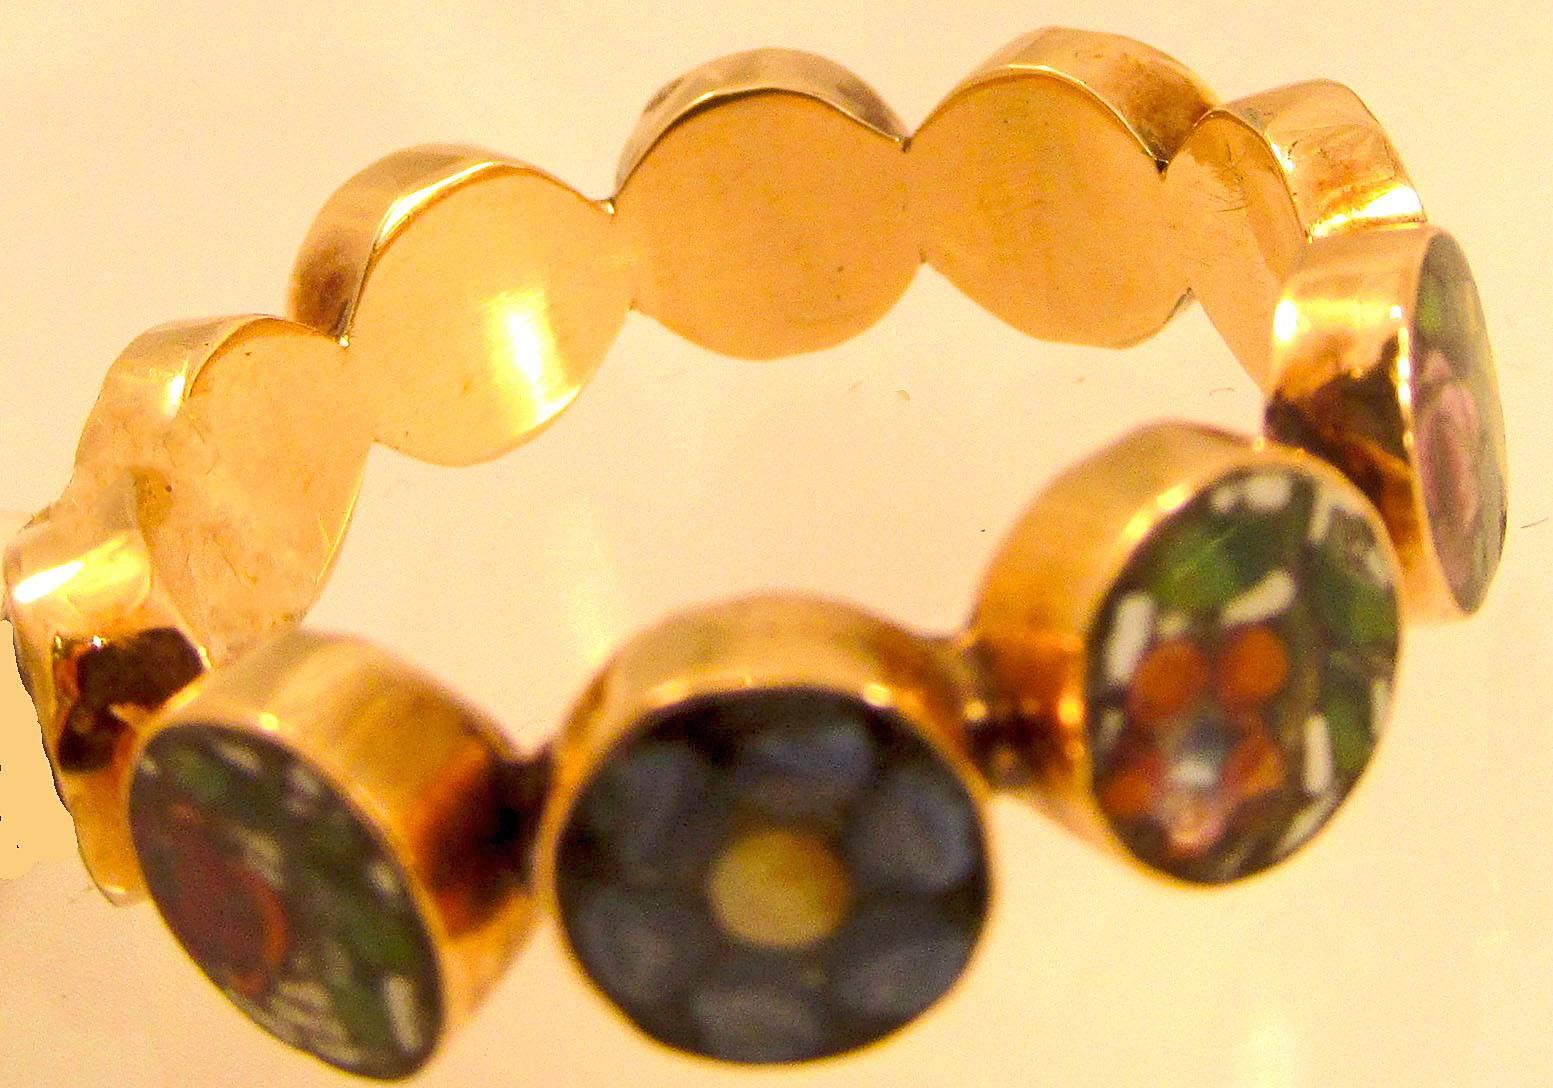 Unusual Georgian micro mosaic eternity band set with tesserae depicting flowers in 18K gold. Wearing micro mosaic jewelry became popular during the Grand Tour period as the small size of the micro mosaic was appealing and could be worn on the